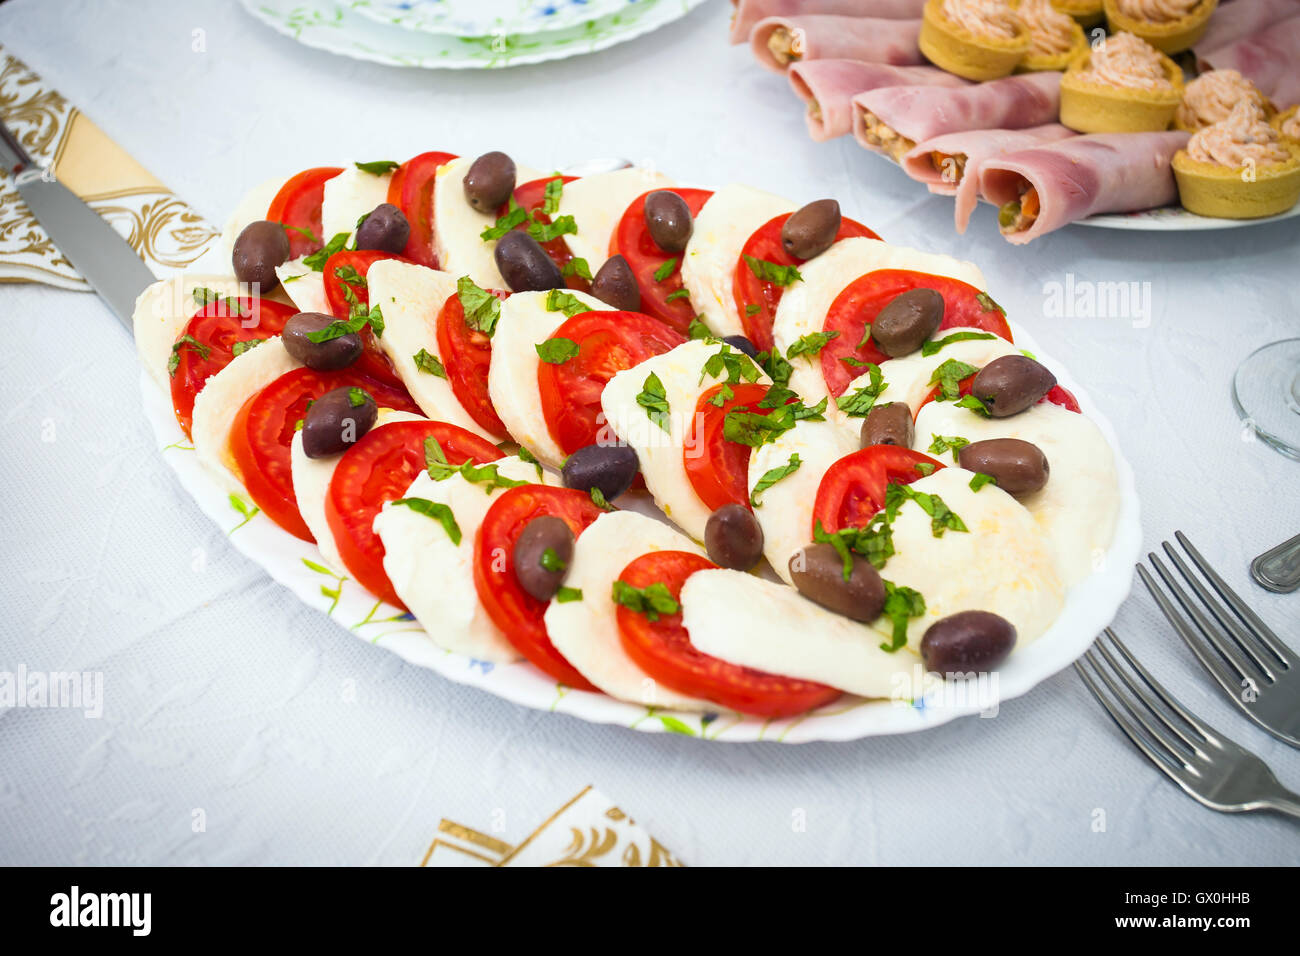 Cocktail food appetizer with slices of mozzarella, tomatoes and olives Stock Photo